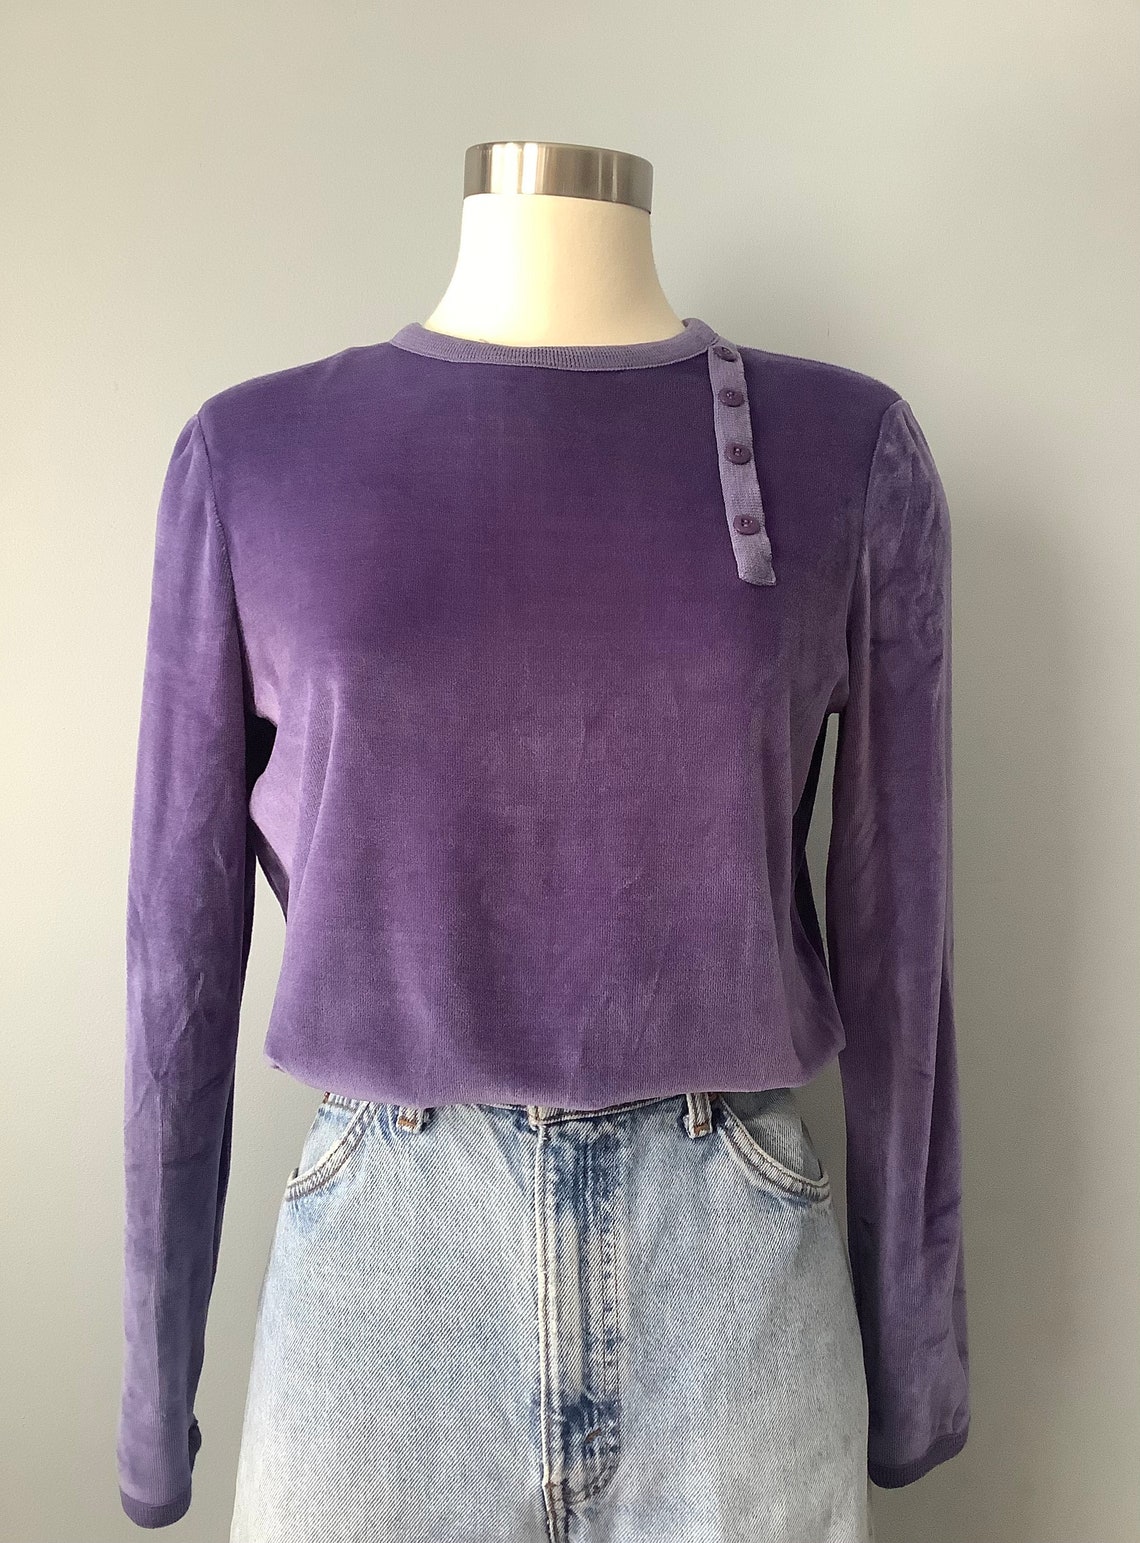 Early 80s Vintage Purple Velour Top | Etsy